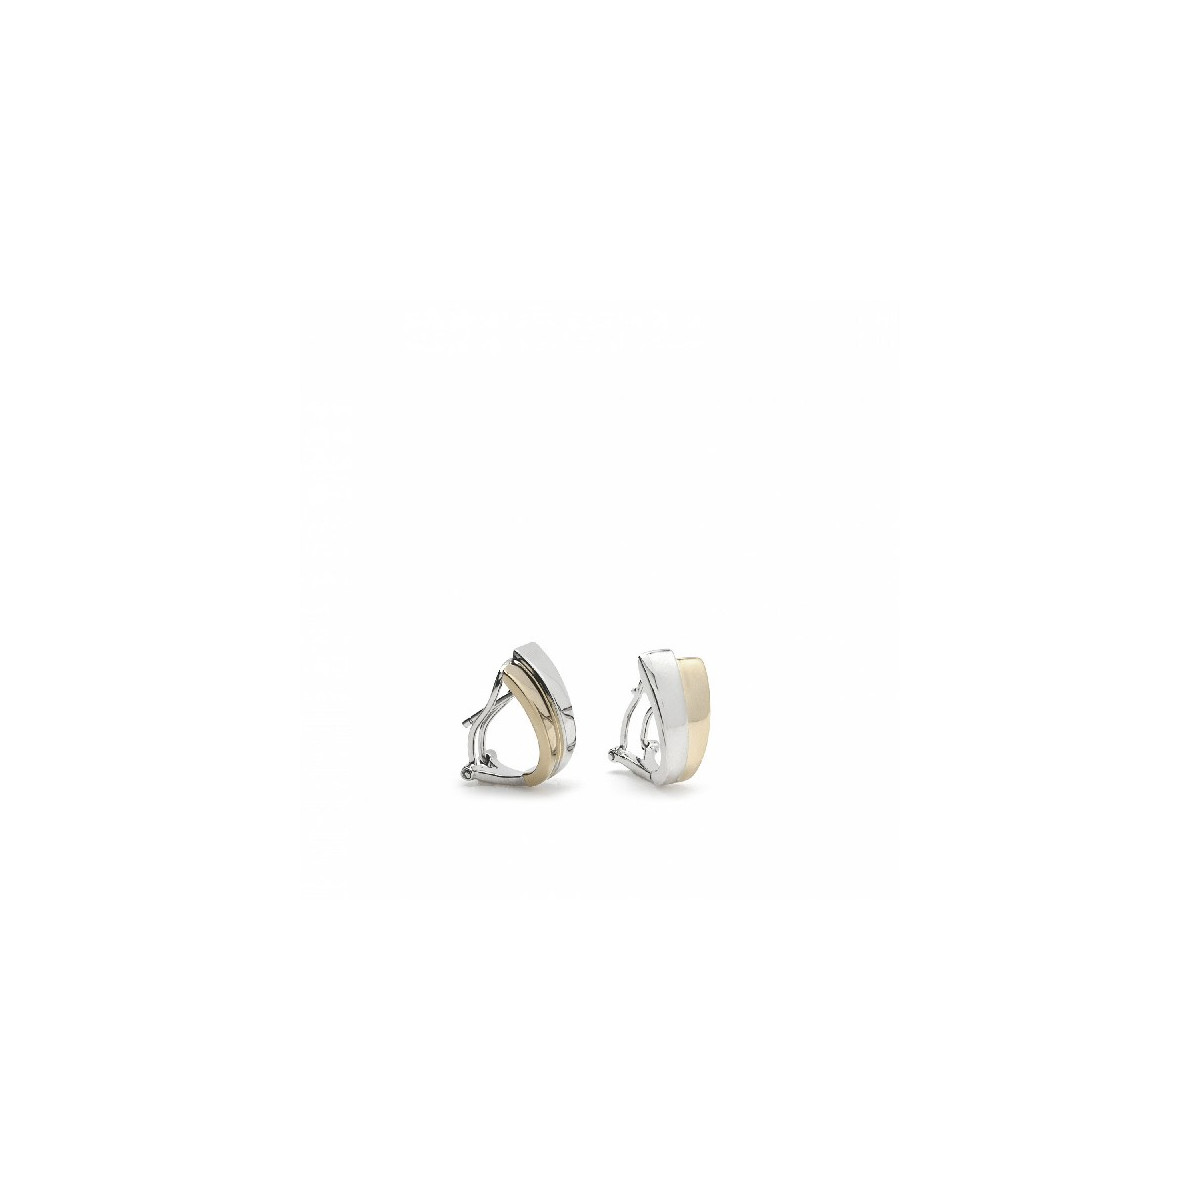 LINEARGENT EARRINGS - 12631-G-A